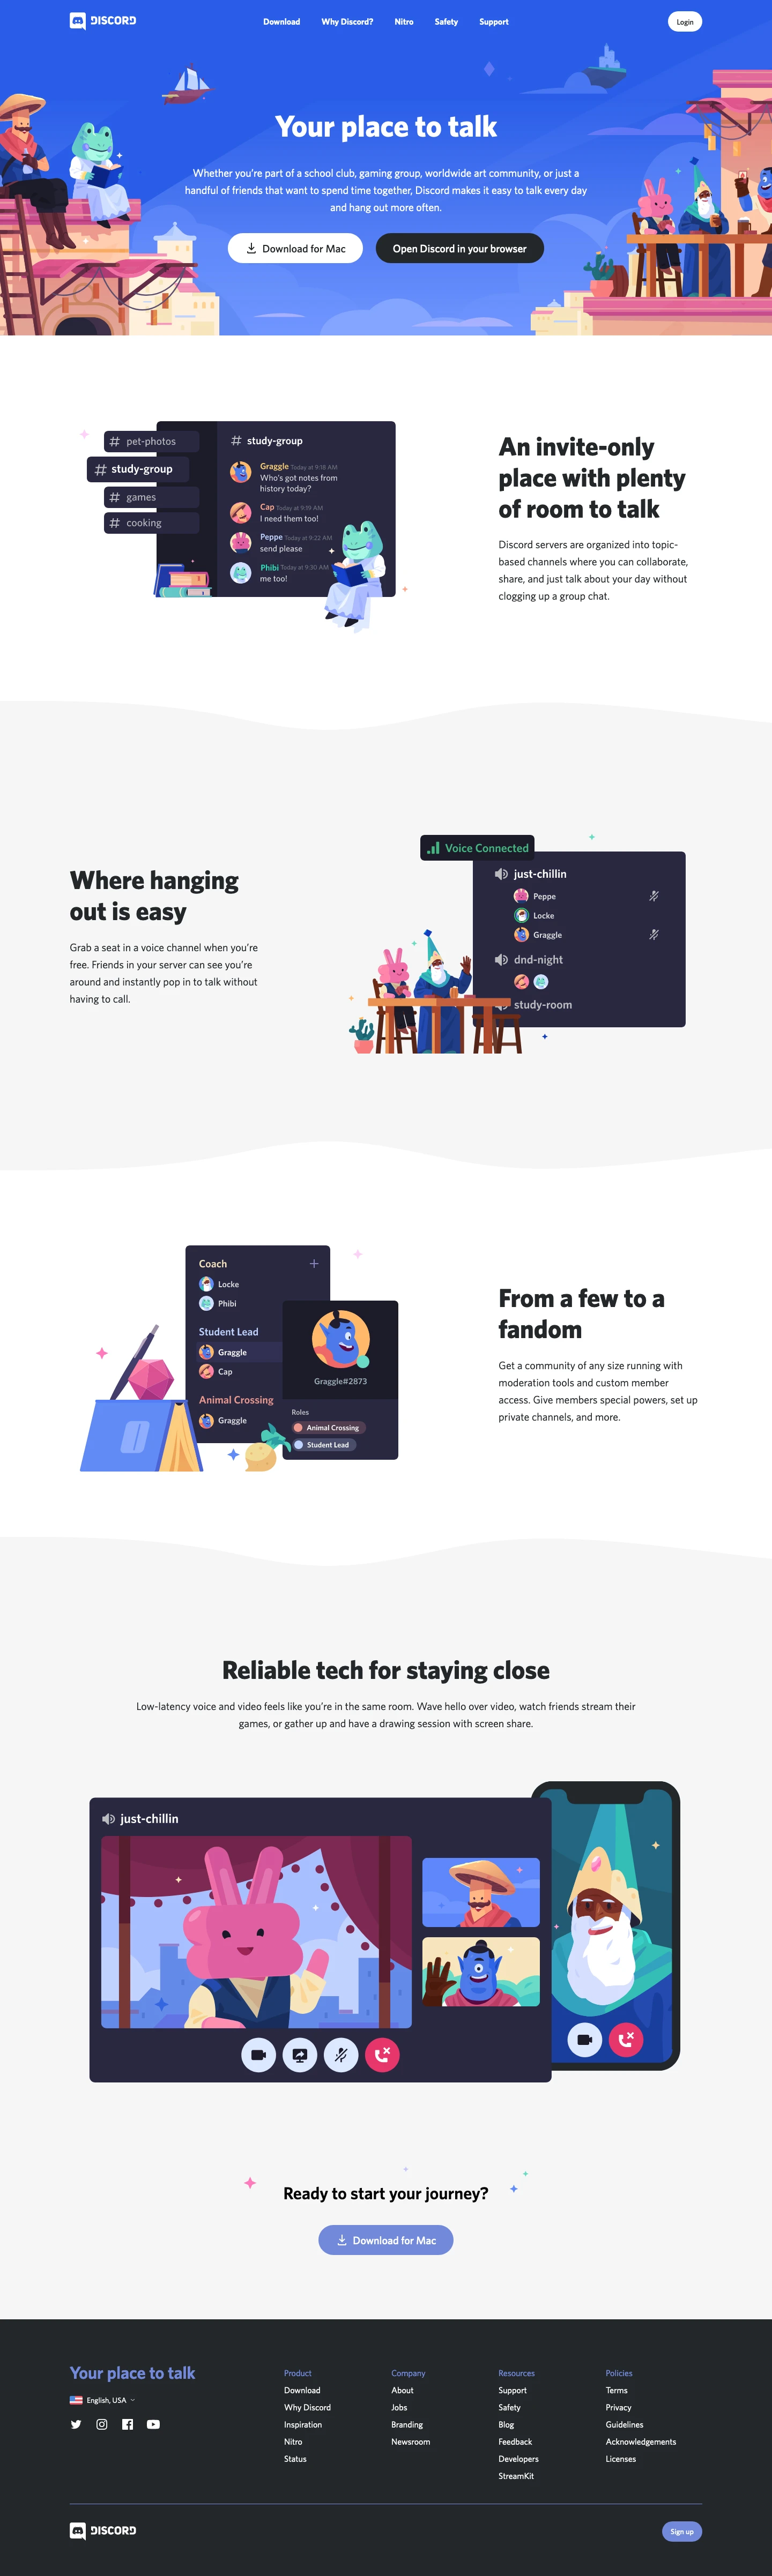 Discord Landing Page Example: Your place to talk. Whether you’re part of a school club, gaming group, worldwide art community, or just a handful of friends that want to spend time together, Discord makes it easy to talk every day and hang out more often.